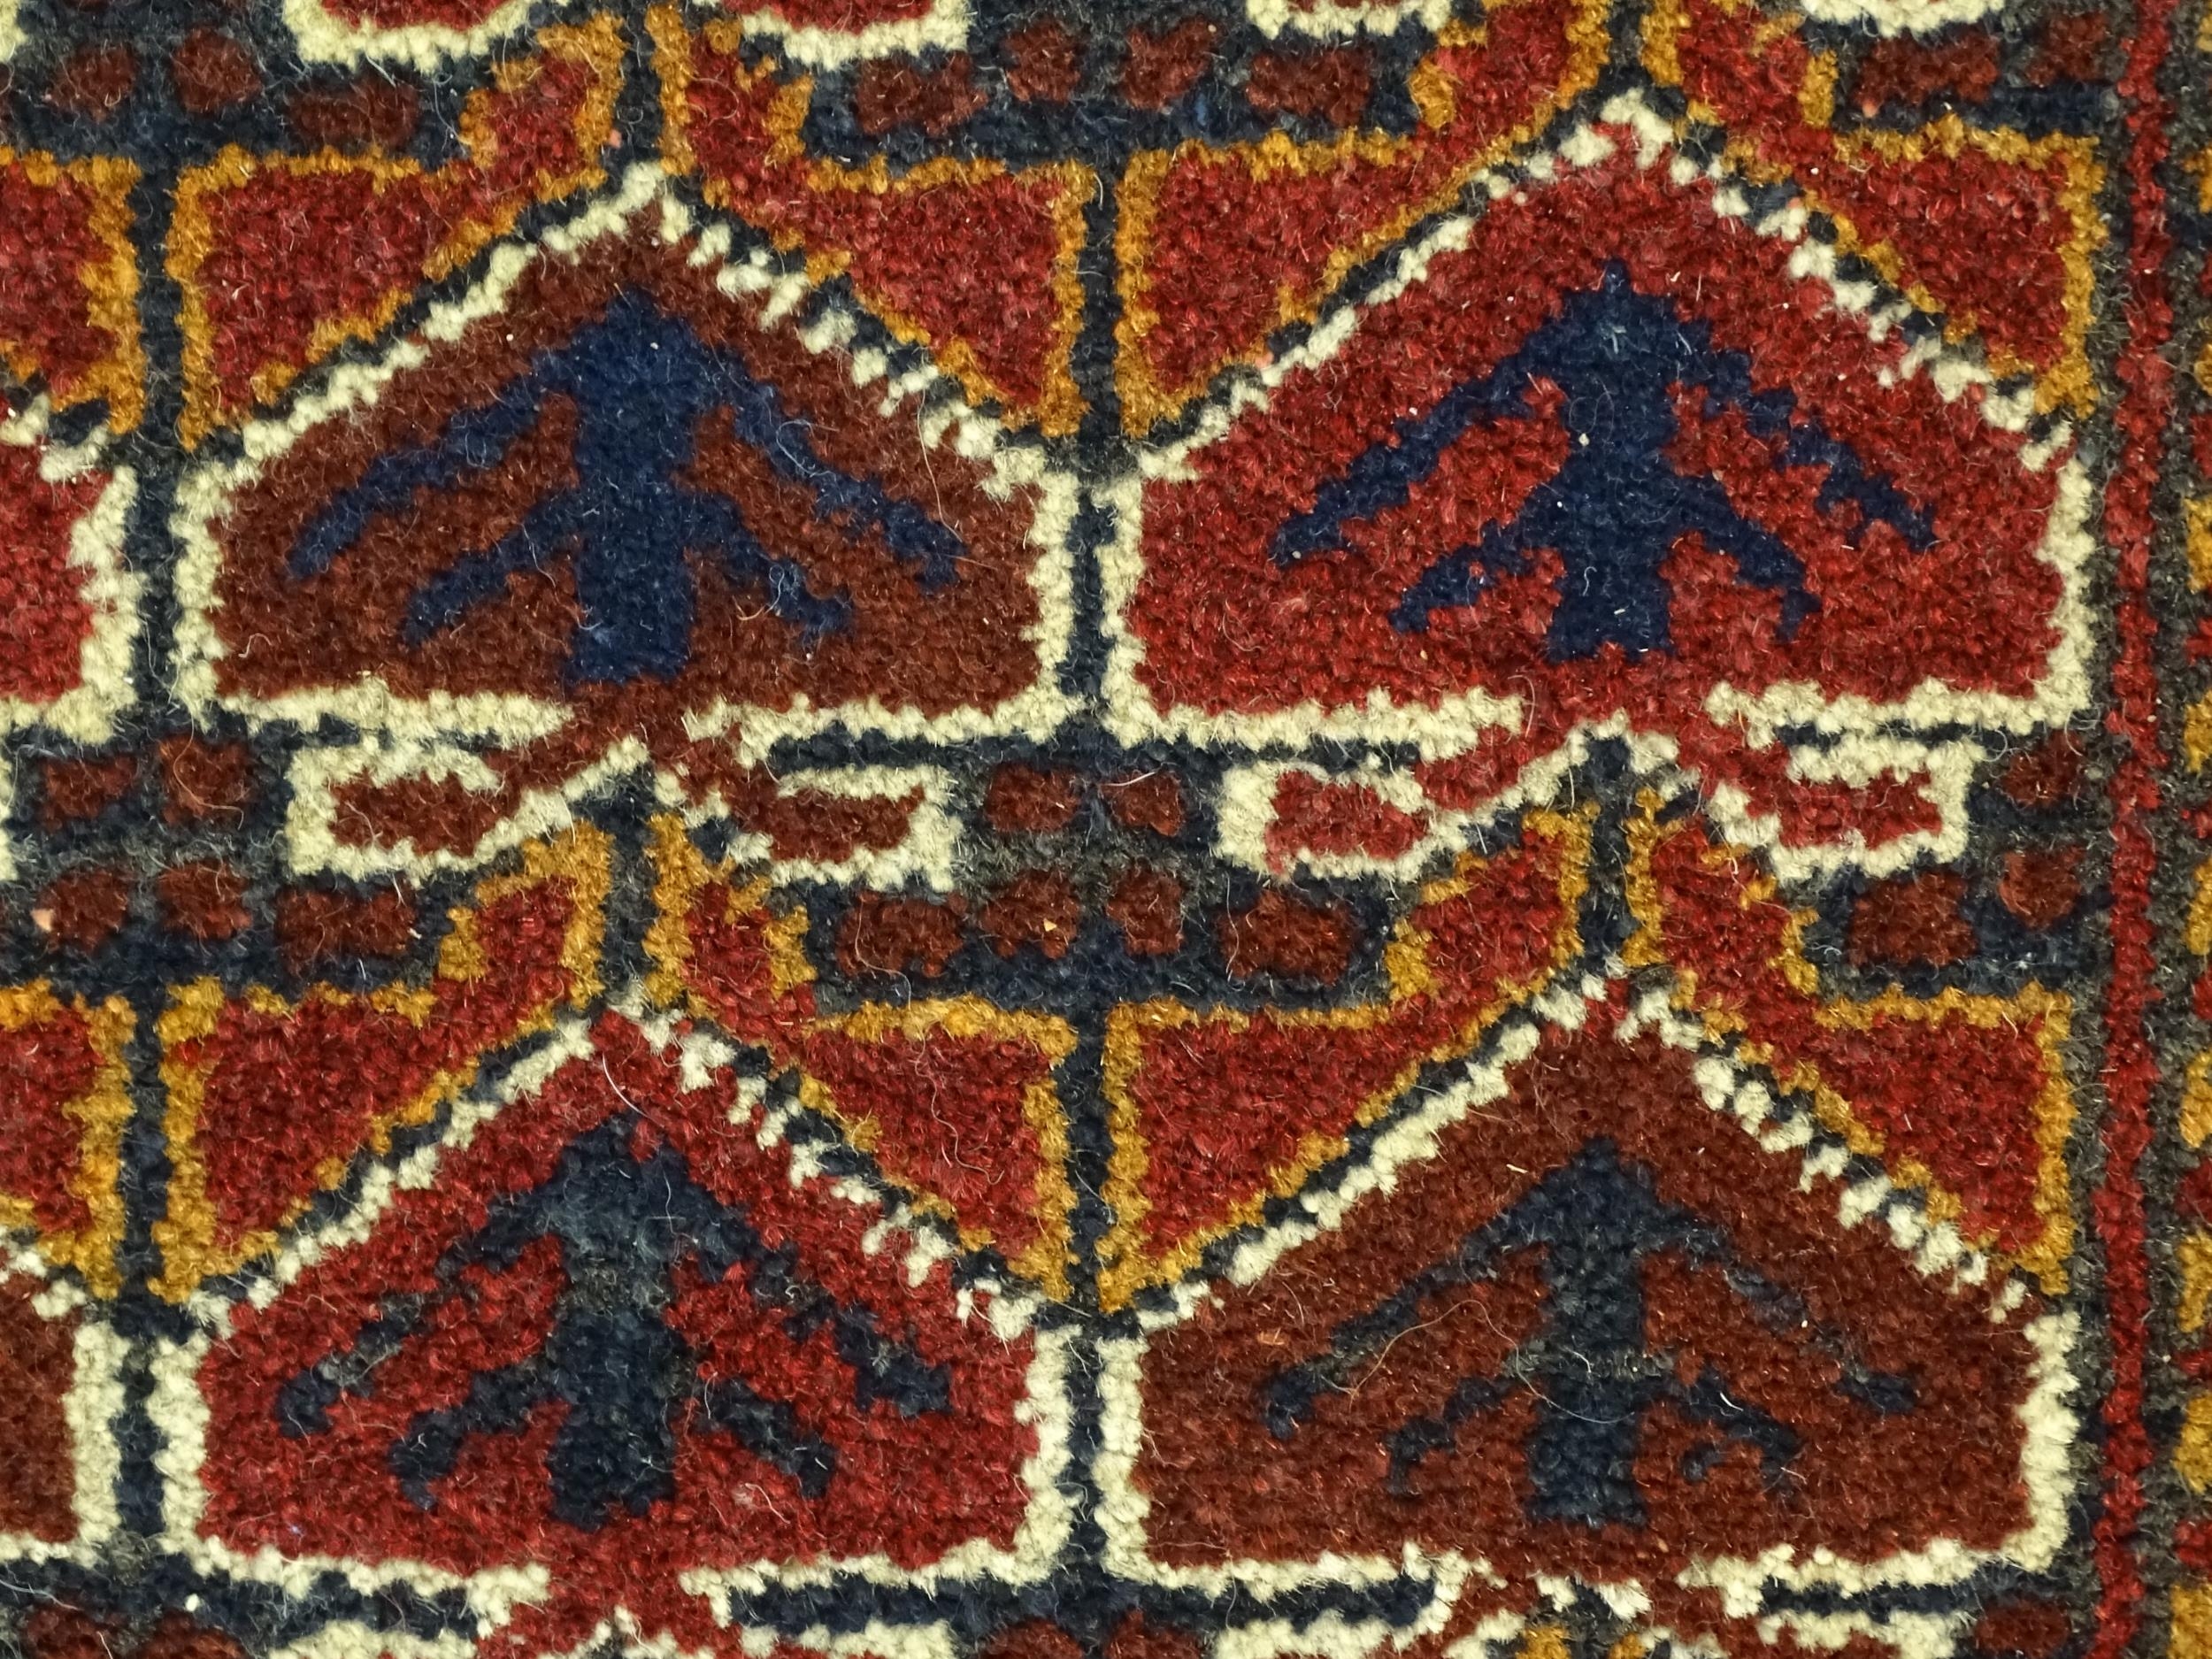 Carpets / Rugs: Two small rugs, one with burgundy ground with repeating motifs, the other with - Image 6 of 6